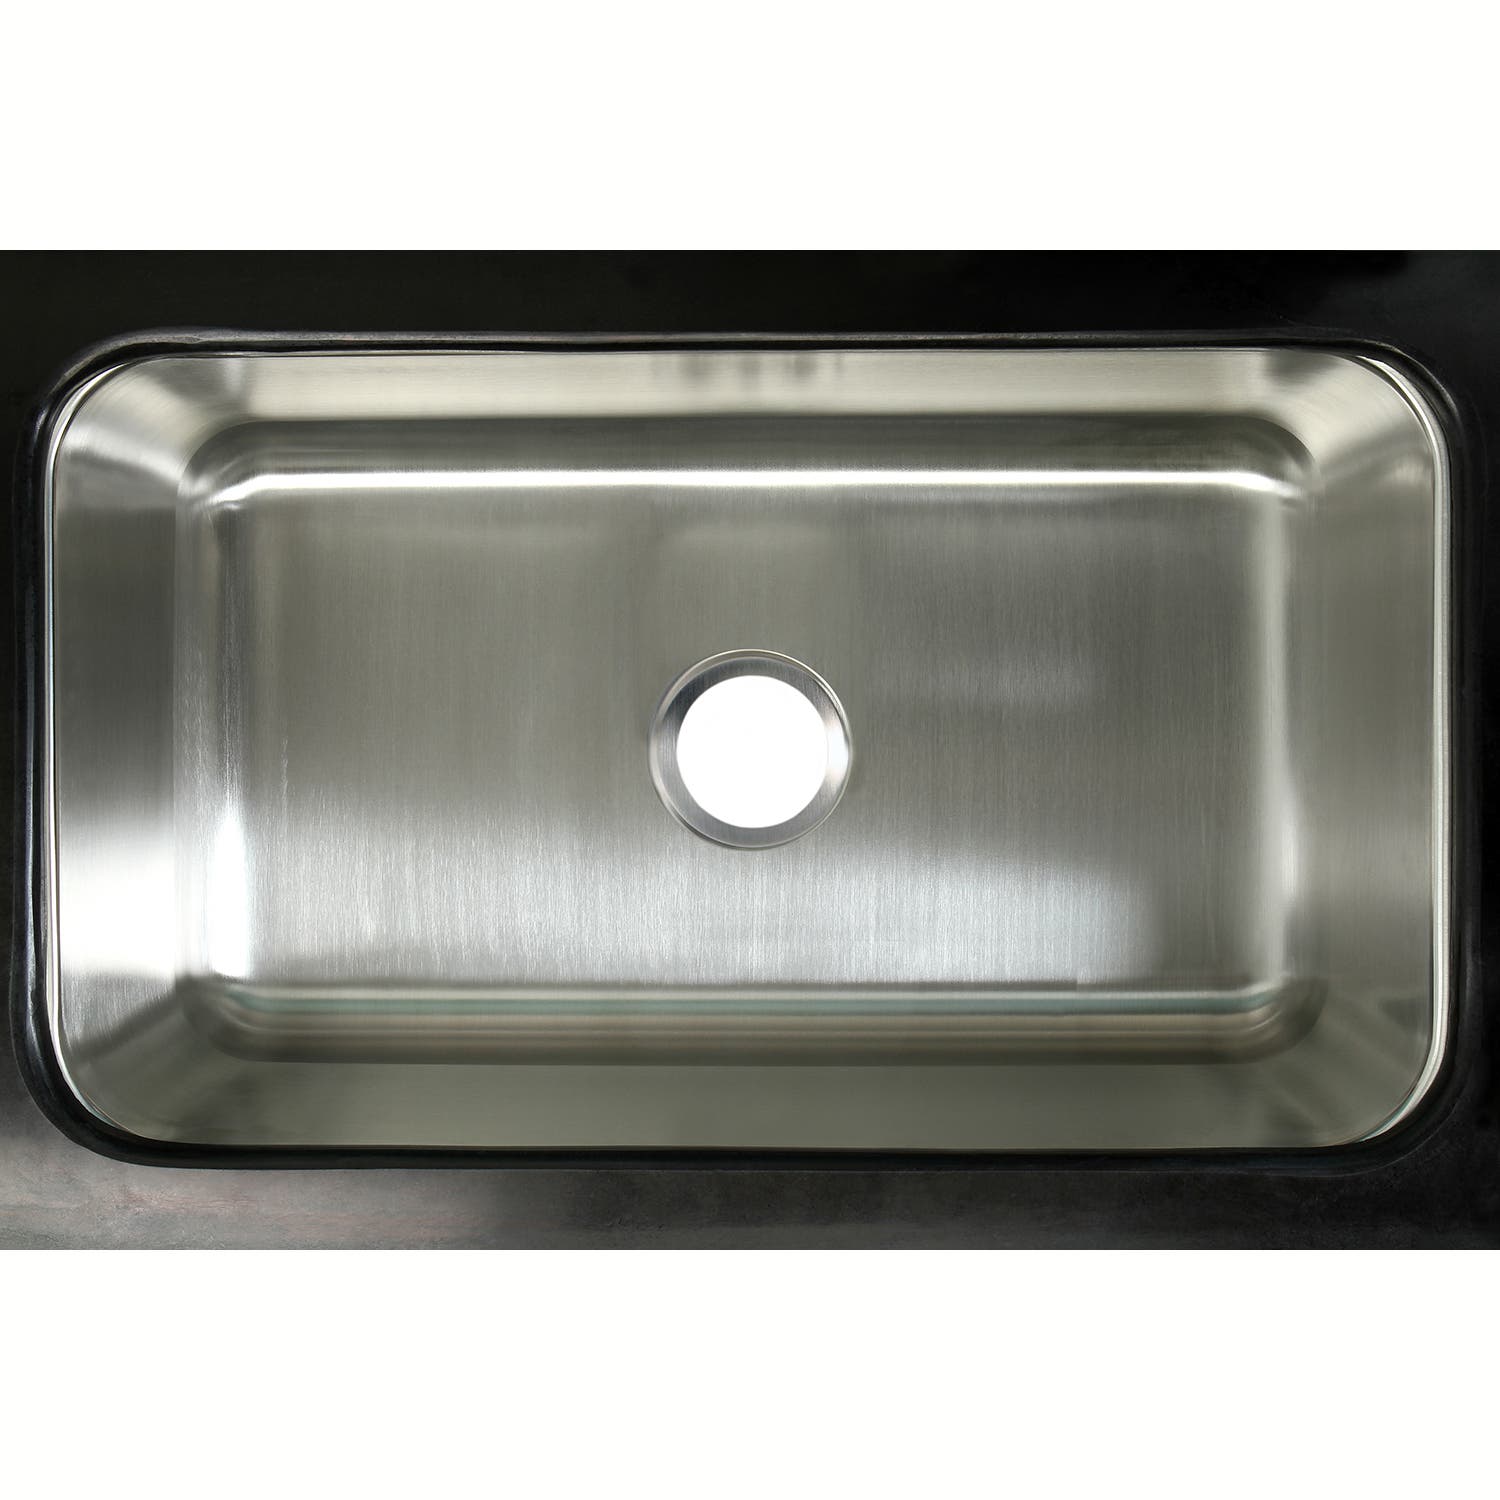 The Buying Guide of Kingston Brass Kitchen Sinks